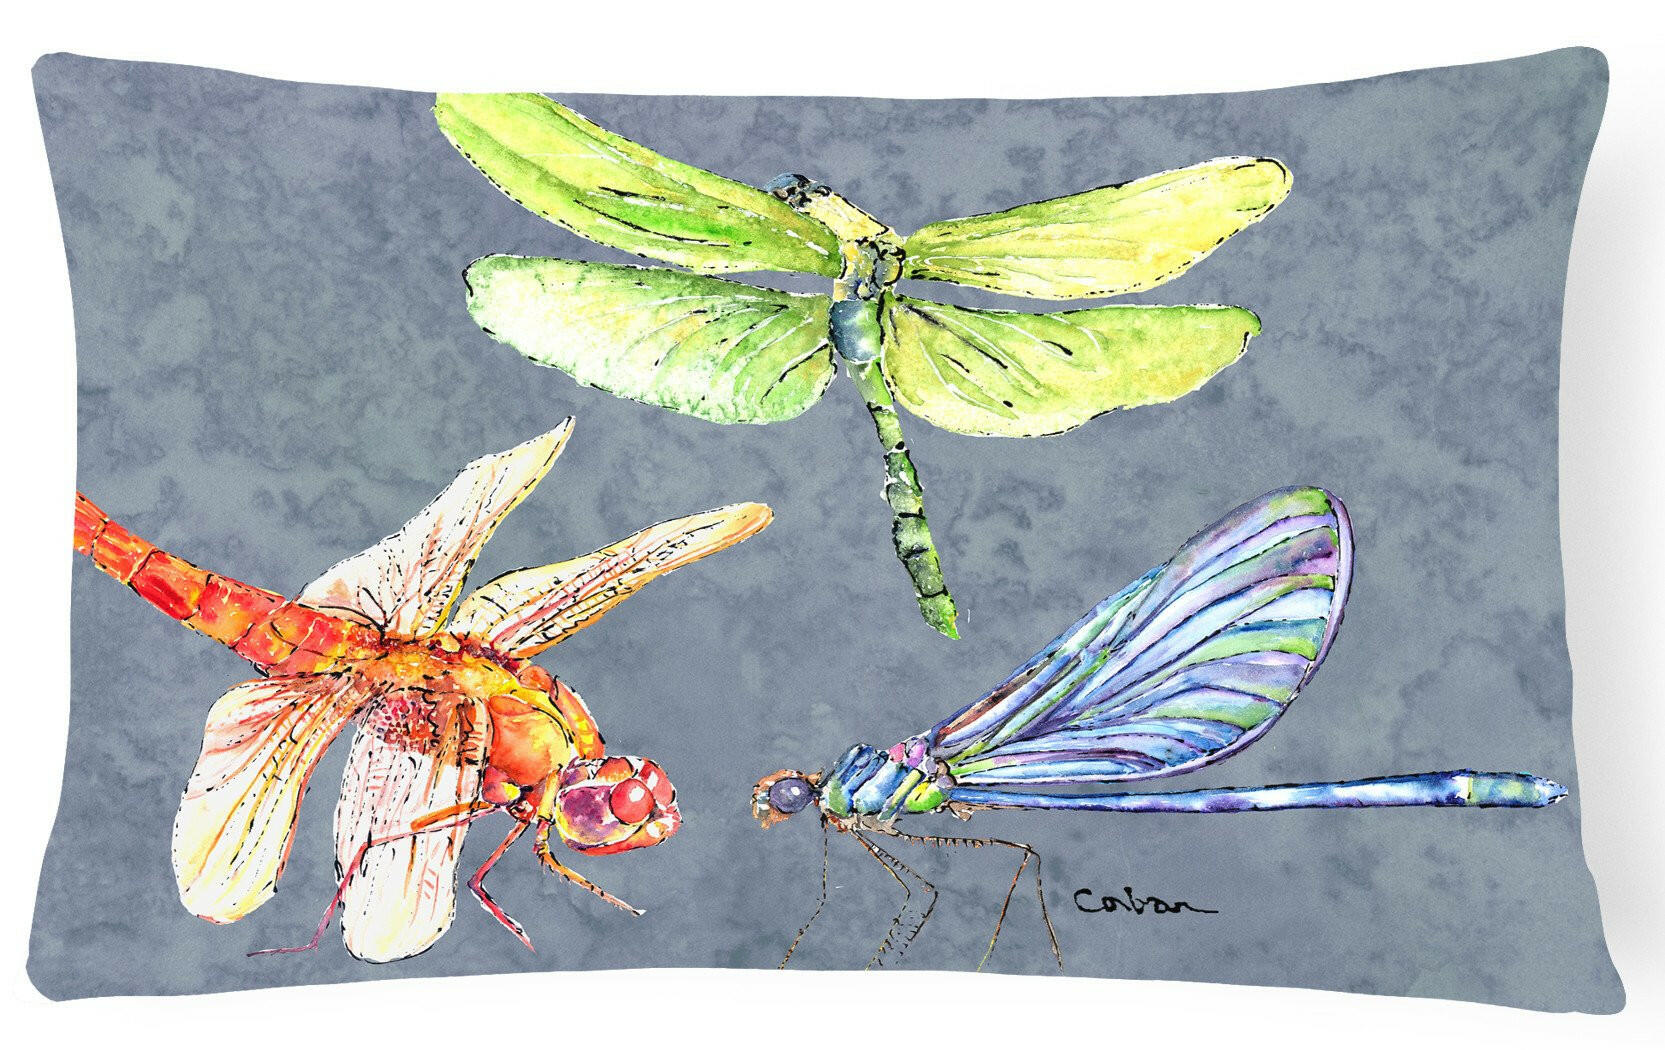 Dragonfly Times Three   Canvas Fabric Decorative Pillow by Caroline's Treasures